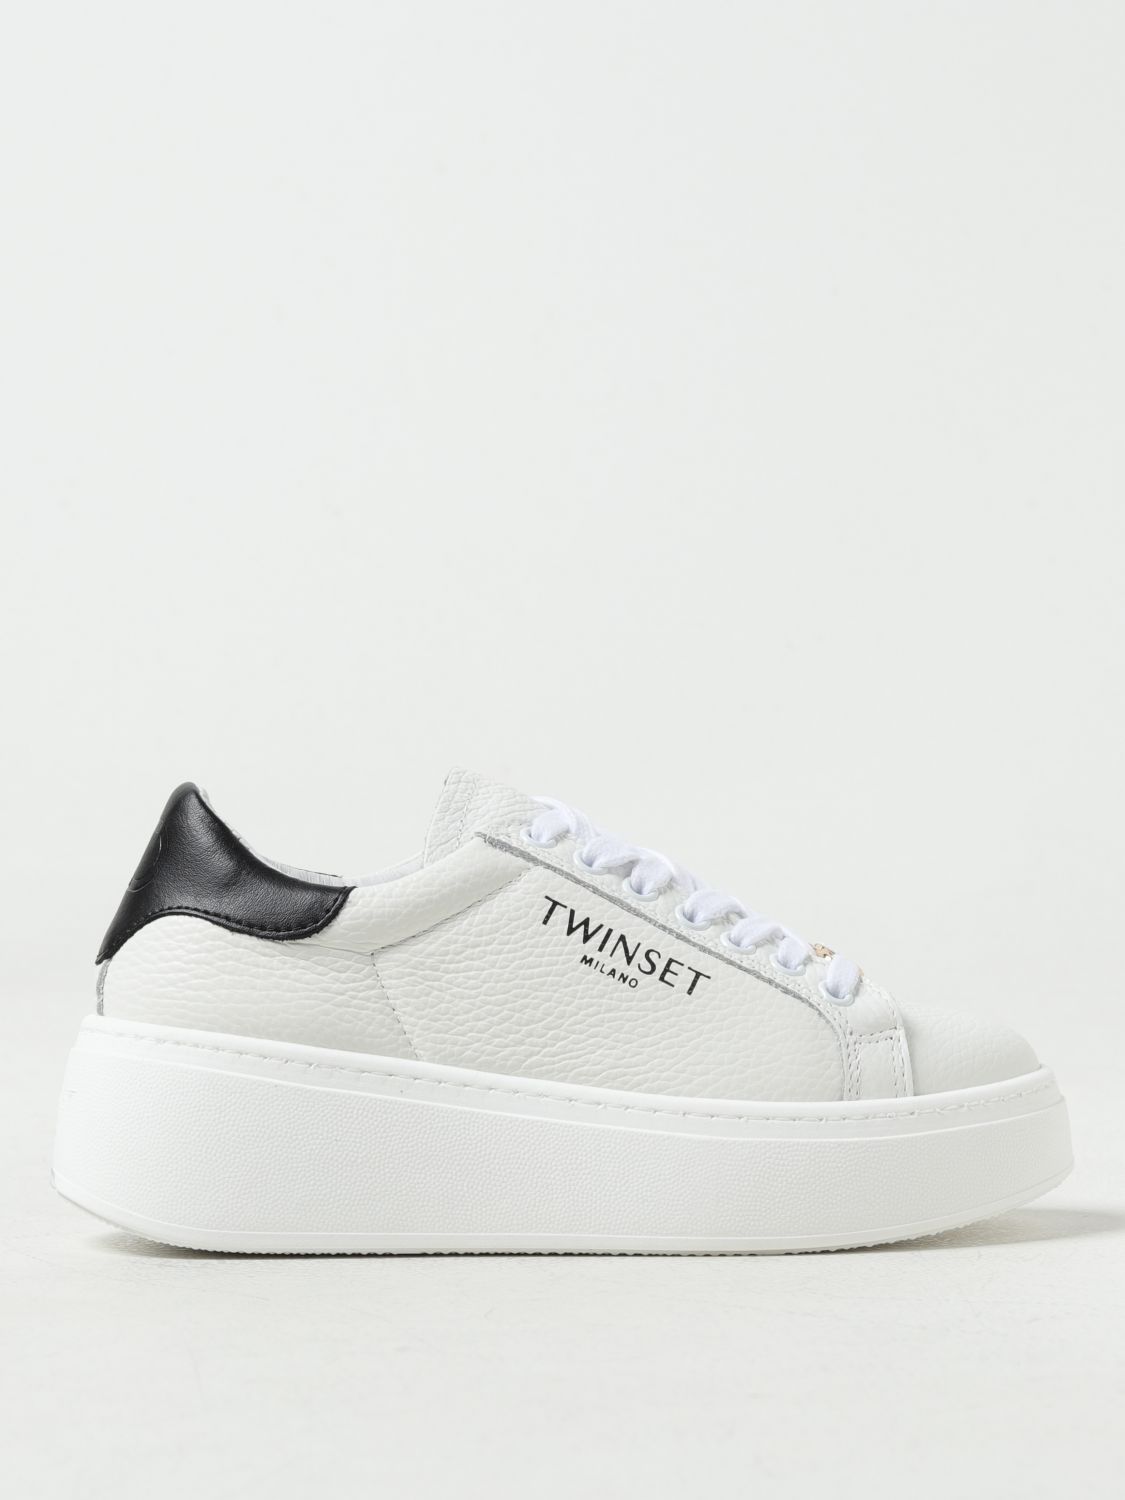 Twinset Sneakers  Damen Farbe Weiss In White